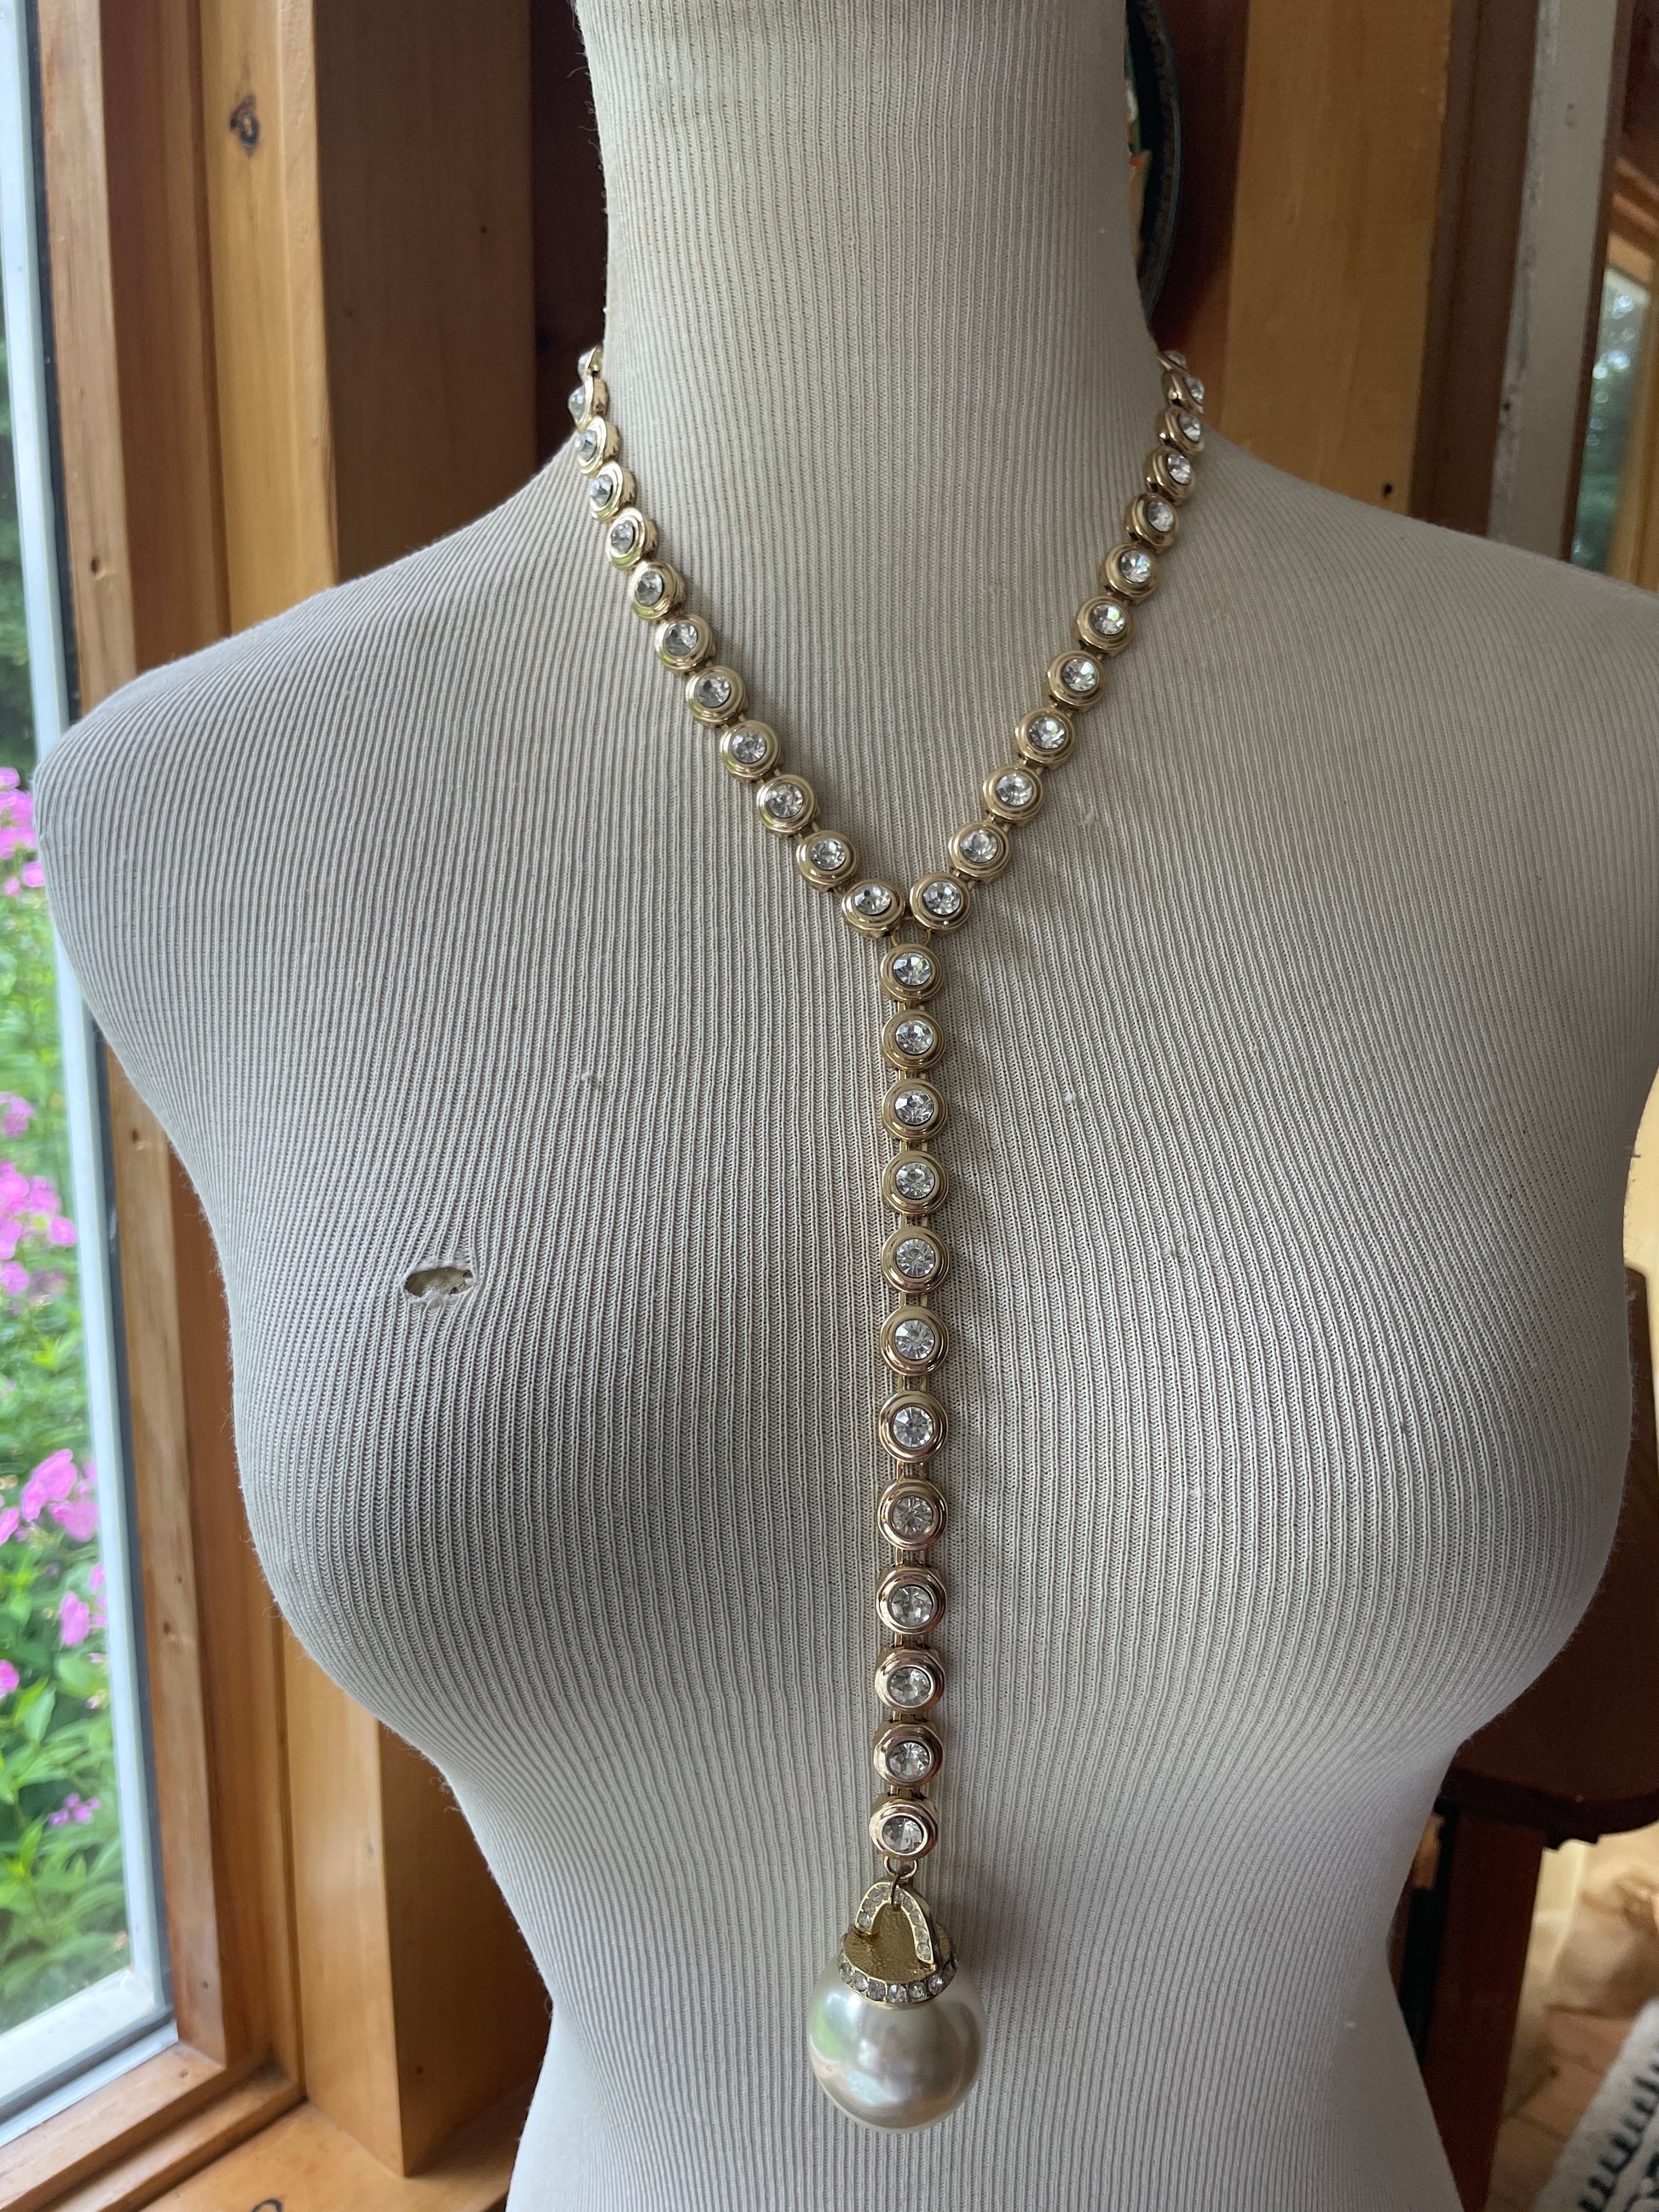  2000s Gold Tone Faux Pearl Necklace